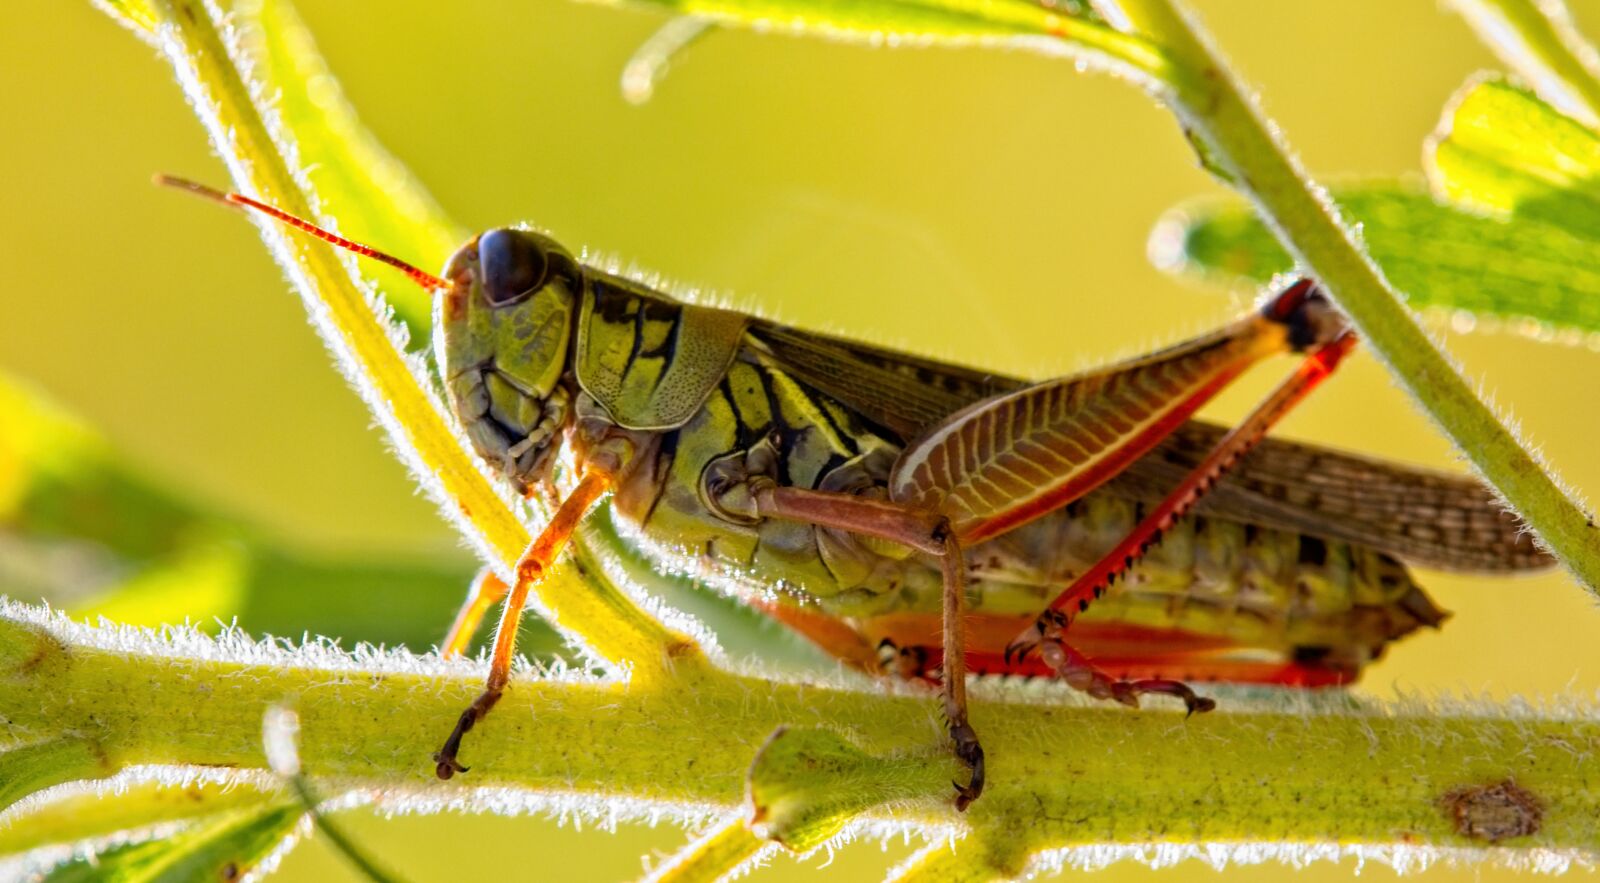 Tamron SP AF 180mm F3.5 Di LD (IF) Macro sample photo. Grasshopper, cricket, insect photography